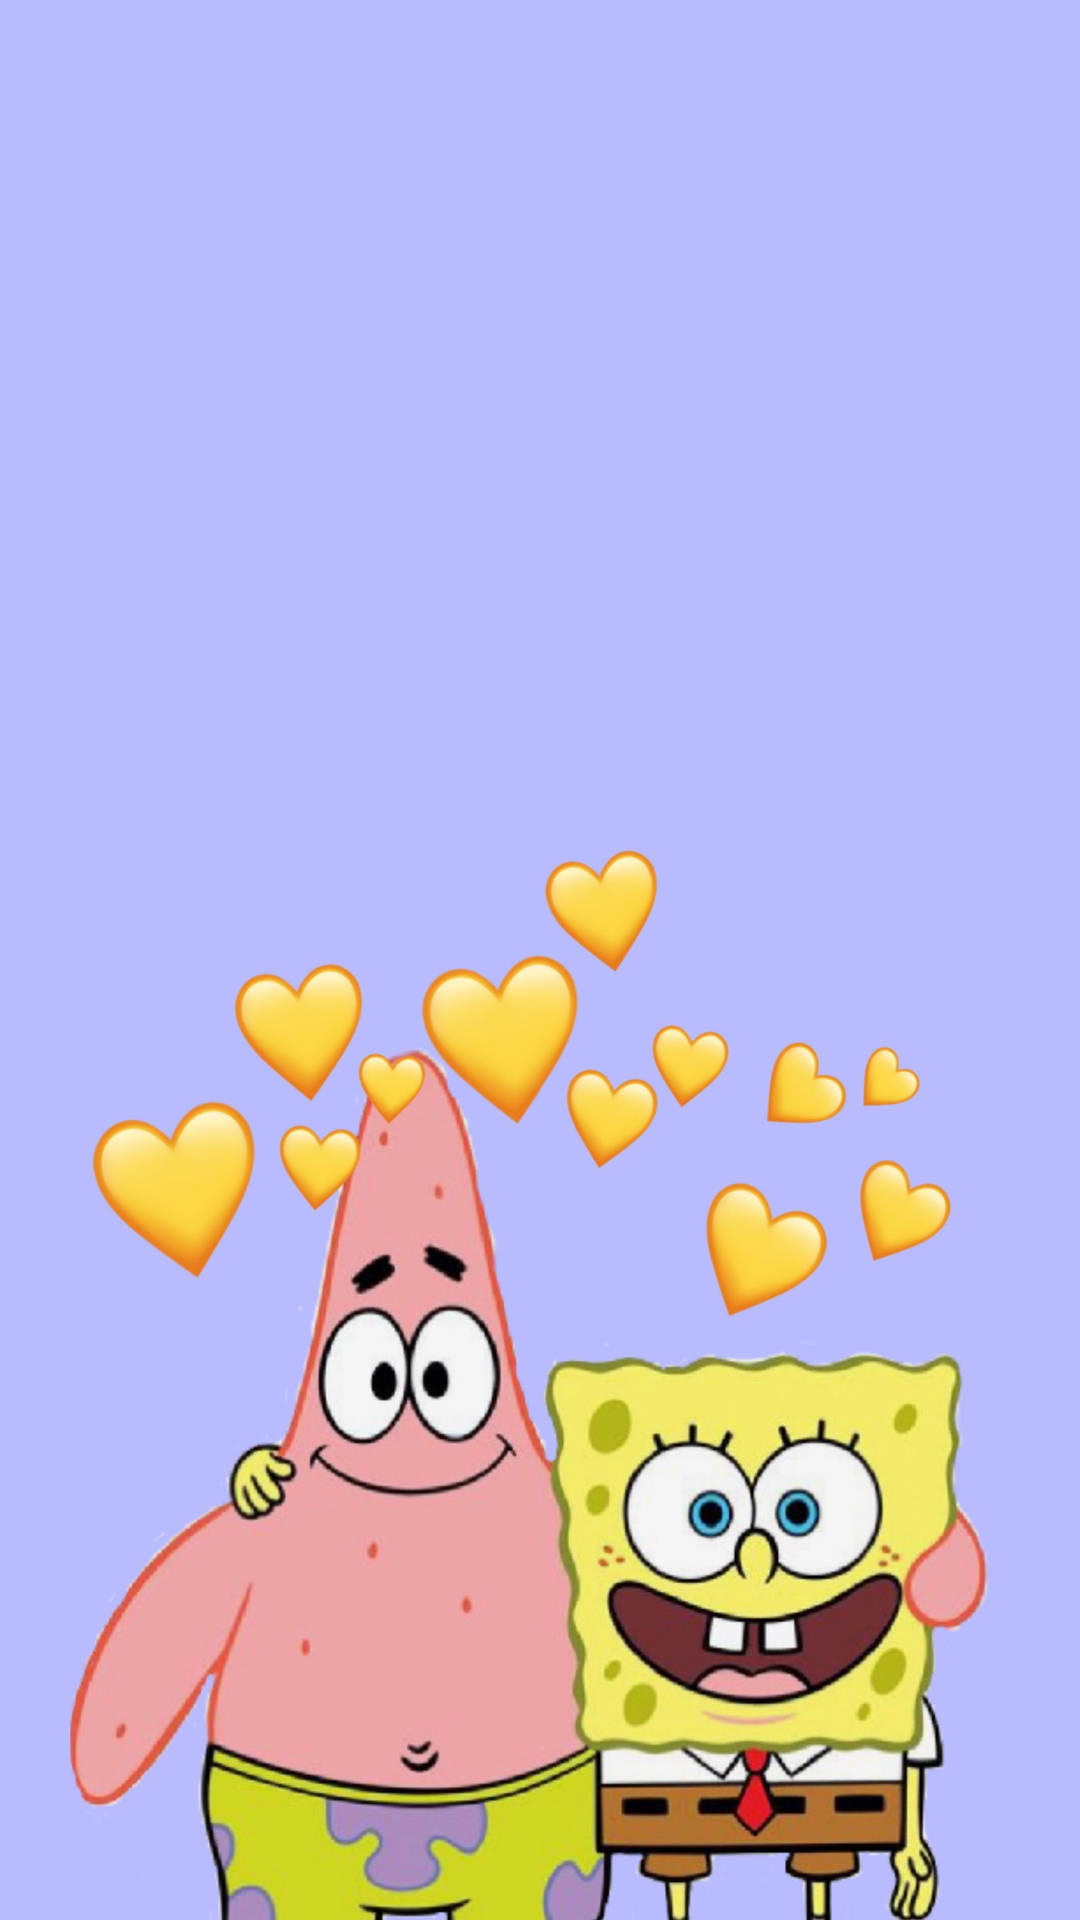 Cool Spongebob With Patrick Poster Background